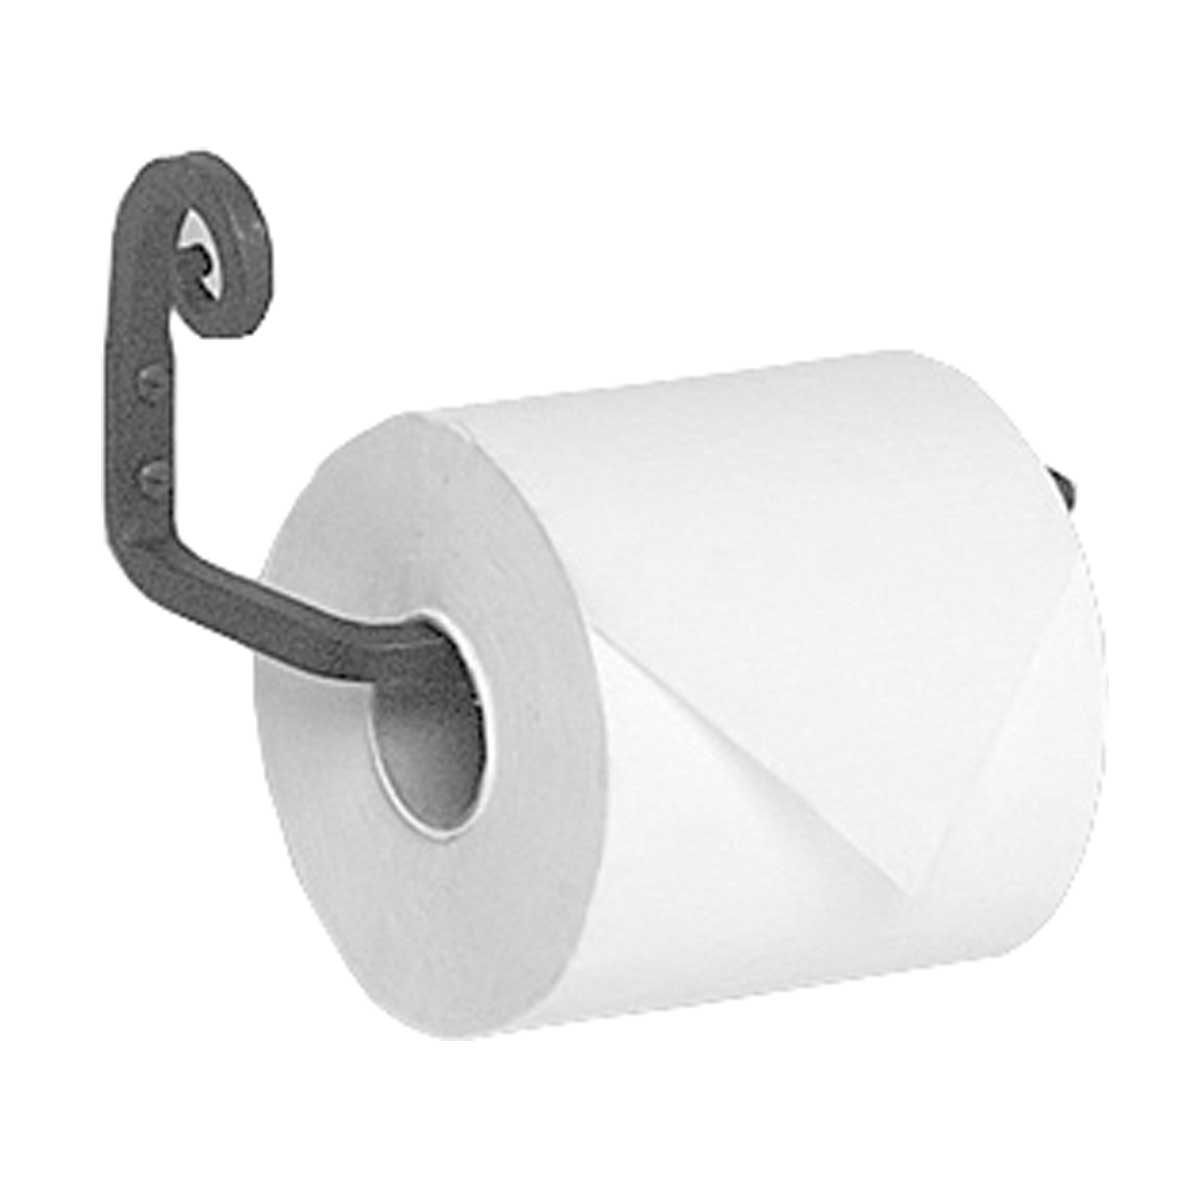 https://wroughtworks.com/images/wrought-iron/wrought-iron-toilet-paper-holder-pigtail-large.jpg